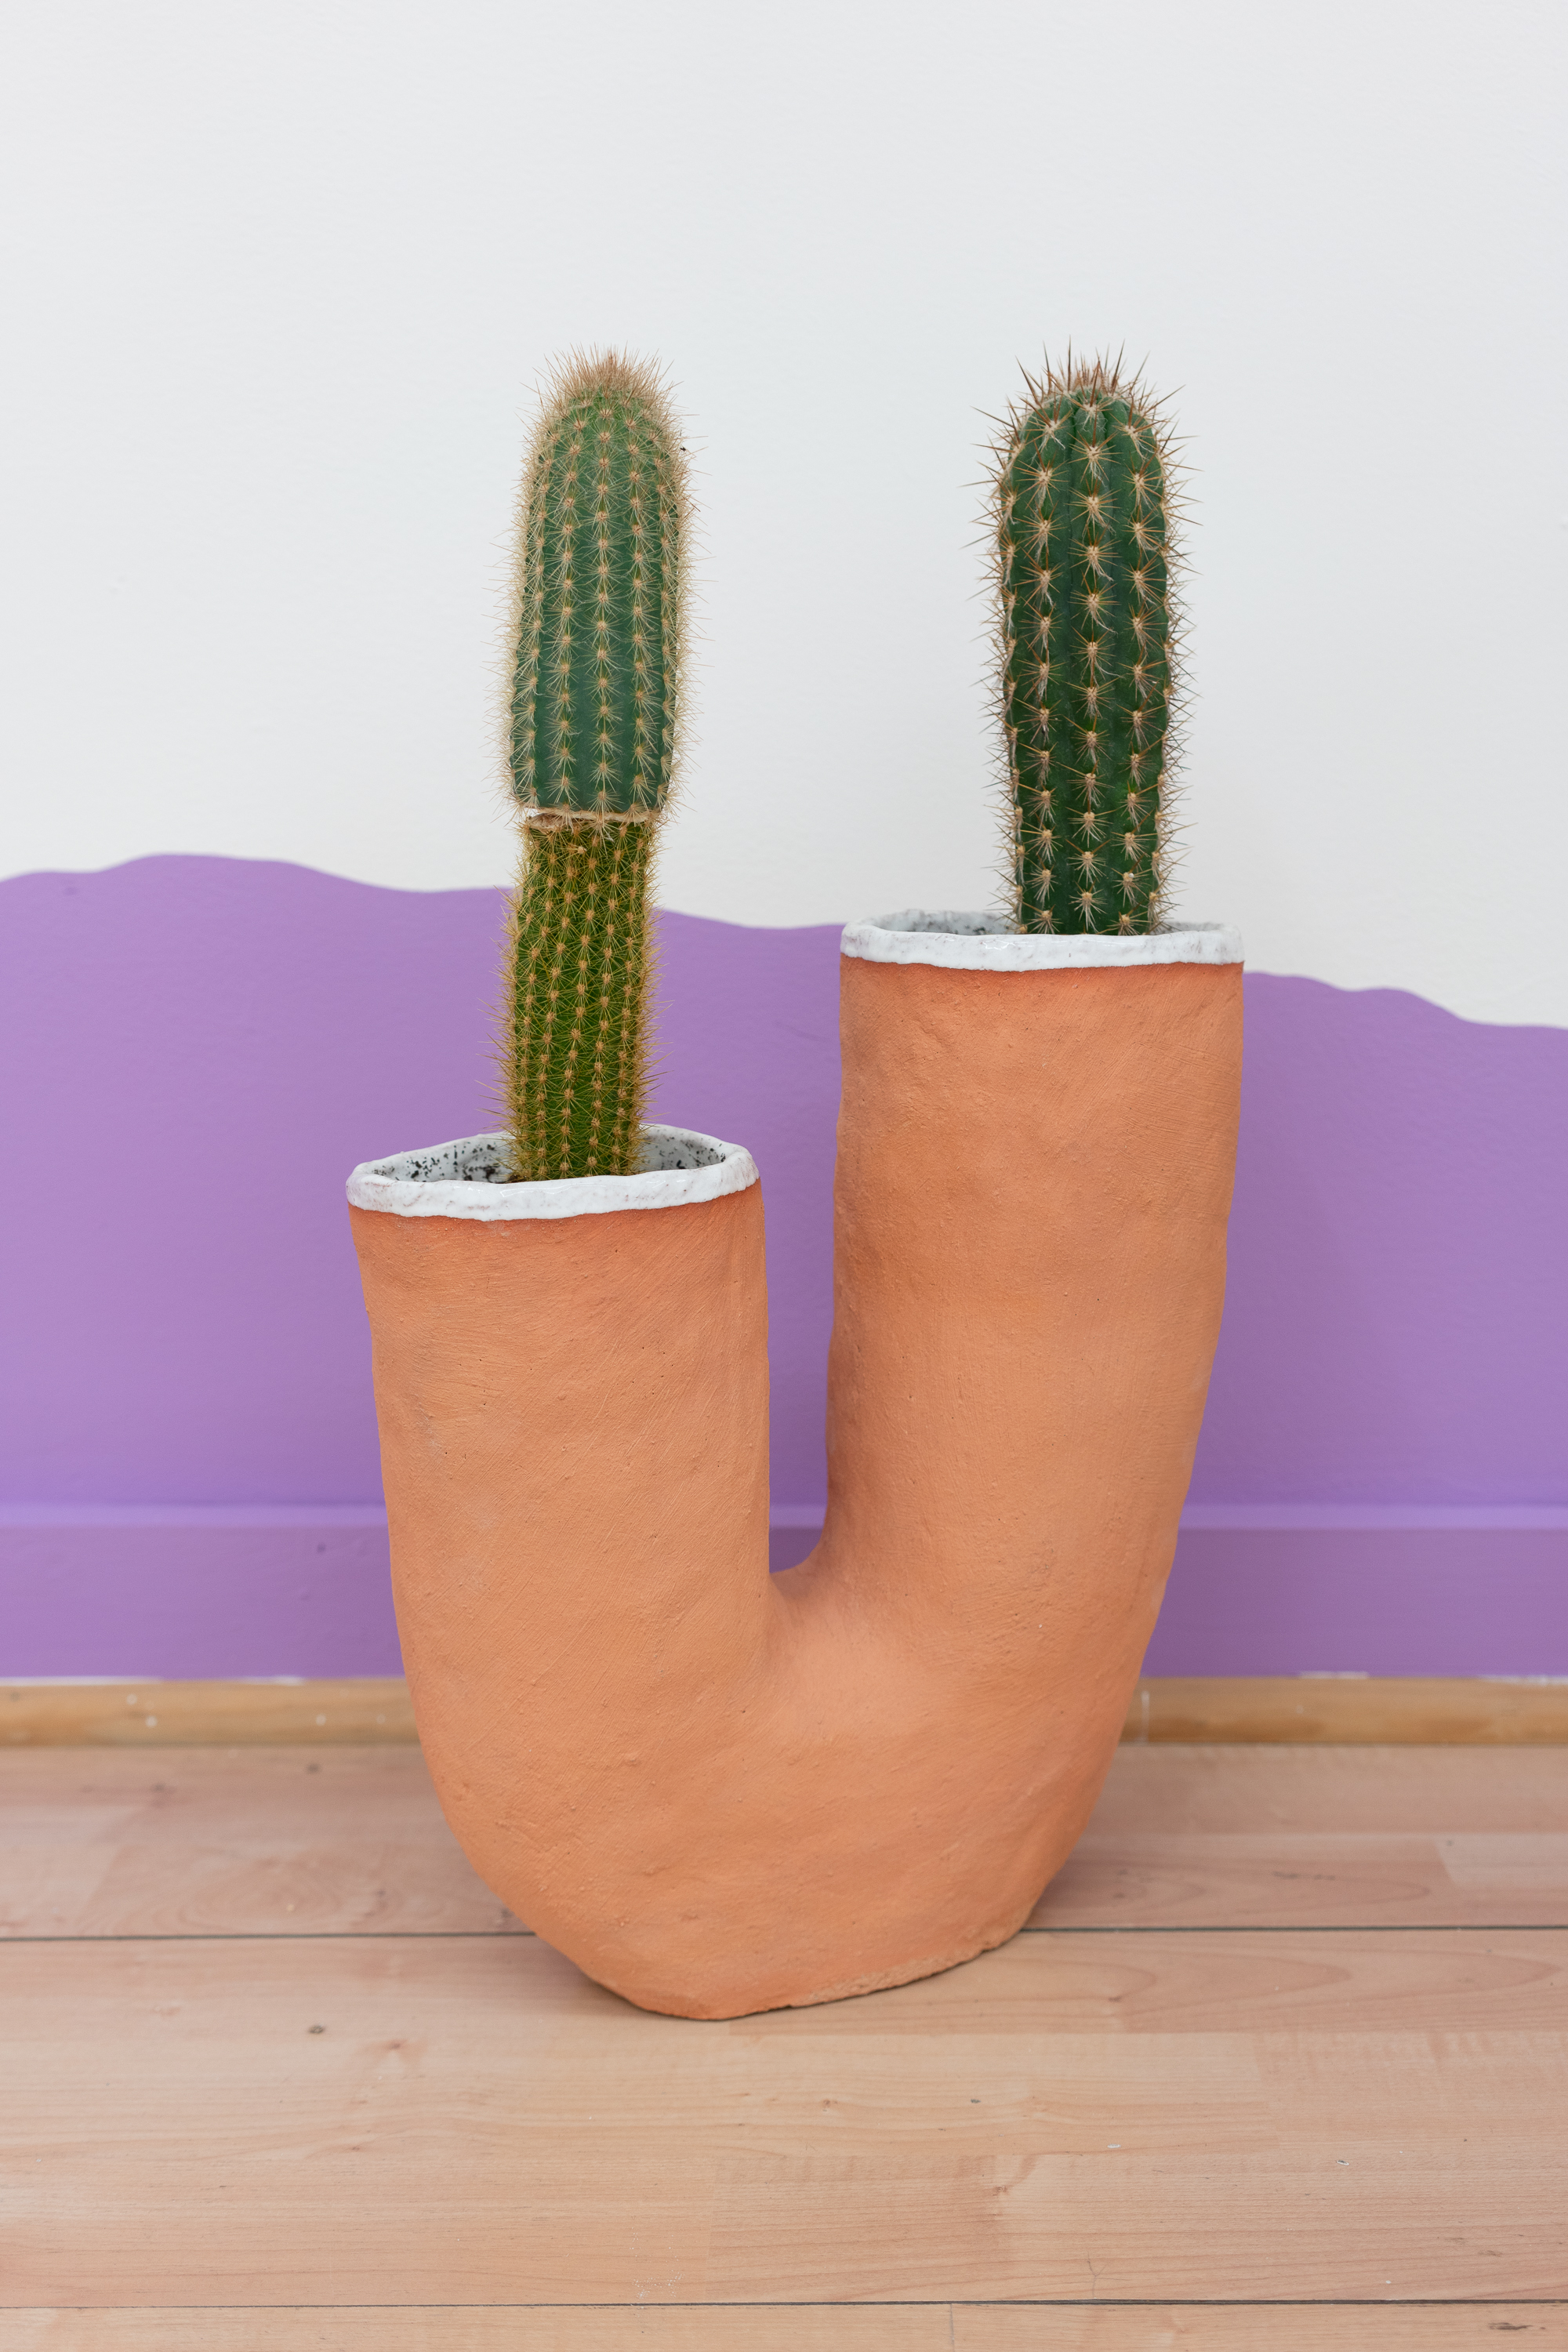  Stephanie Rohlfs,  Grafted Plant Object , 2018, Grafted ceramic, cacti, 20 x 12 x 5 in. 